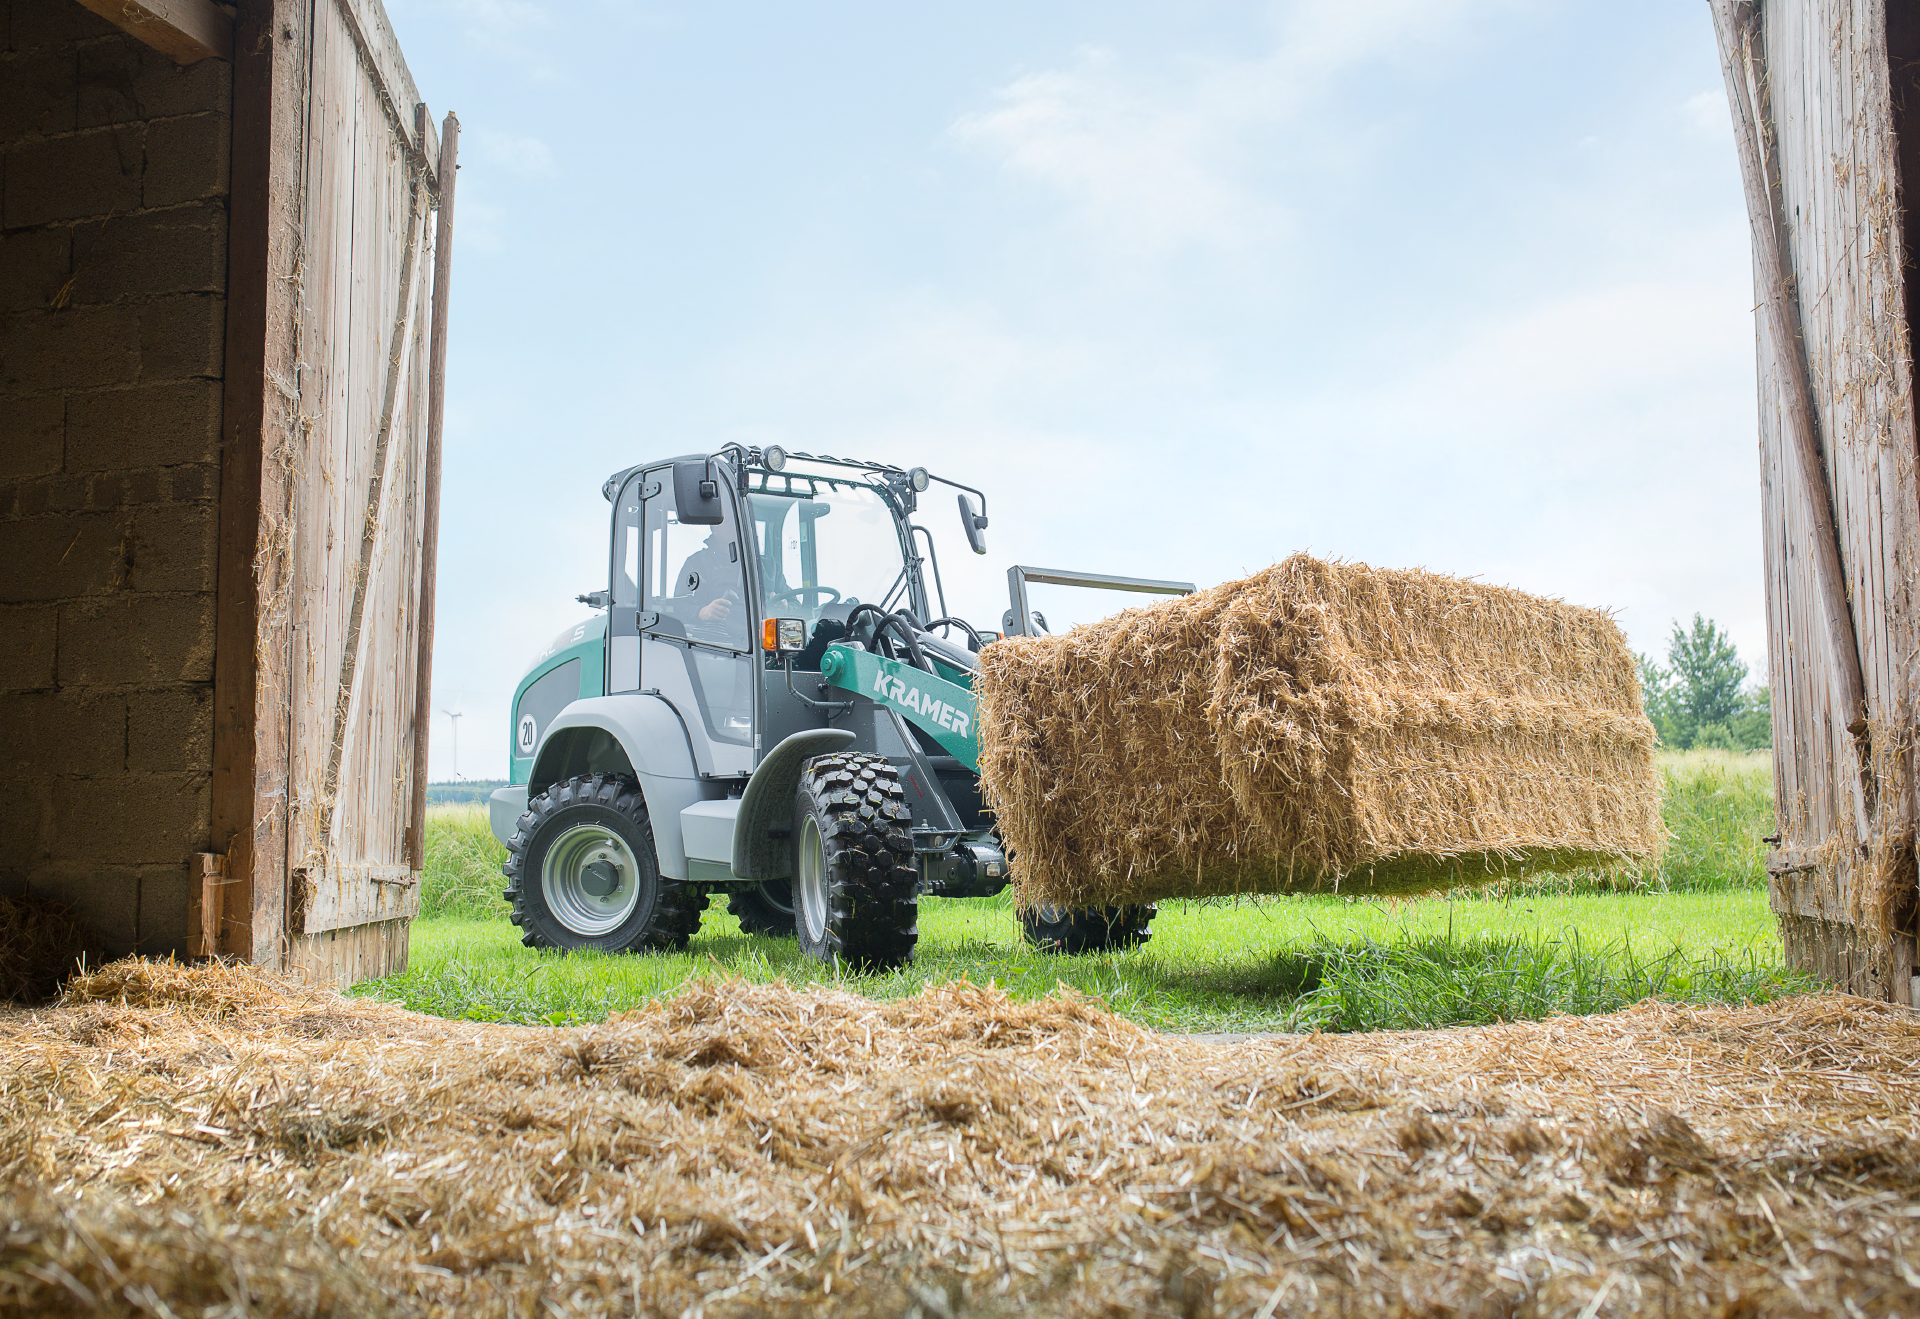 The Kramer wheel loader KL18.5 while manoeuvring with straw.